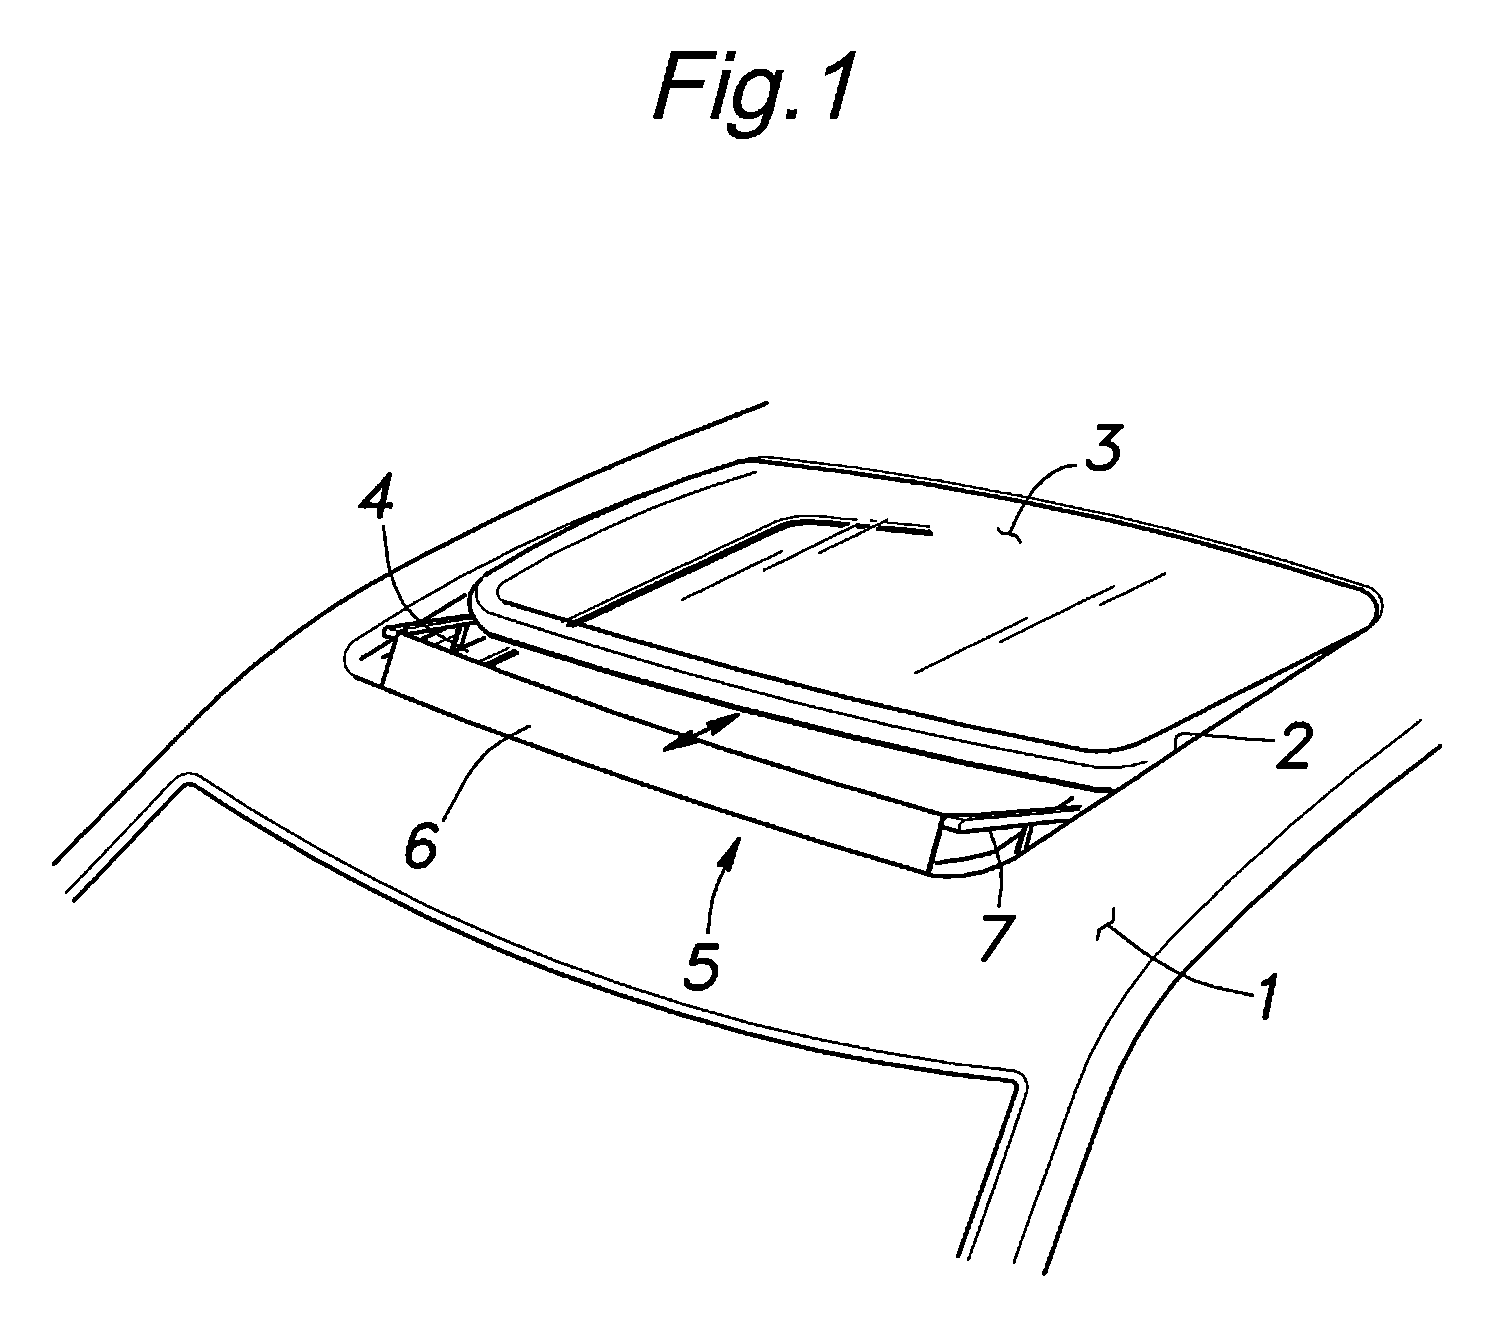 Deflector device for a sunroof device